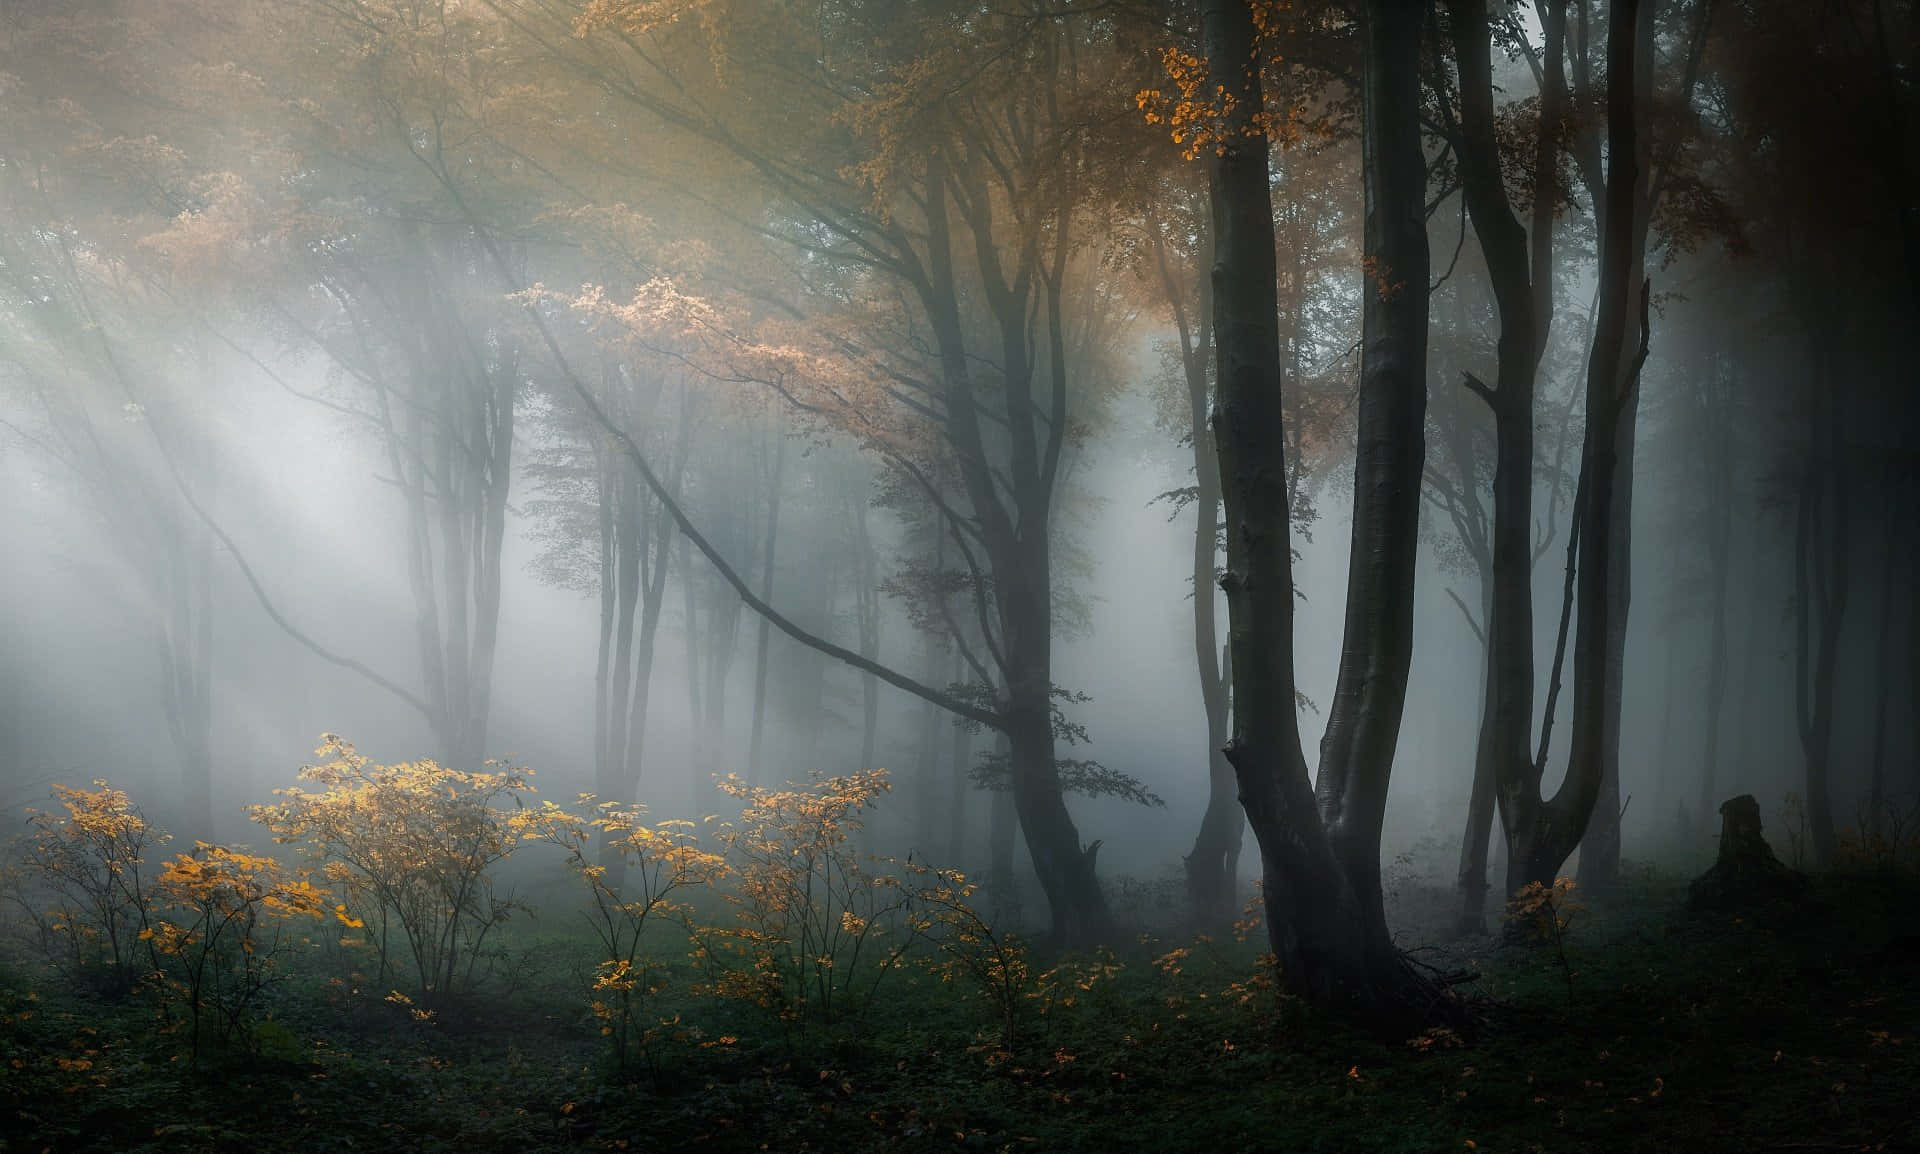 A mysterious foggy landscape that captures the essence of an aesthetic experience. Wallpaper